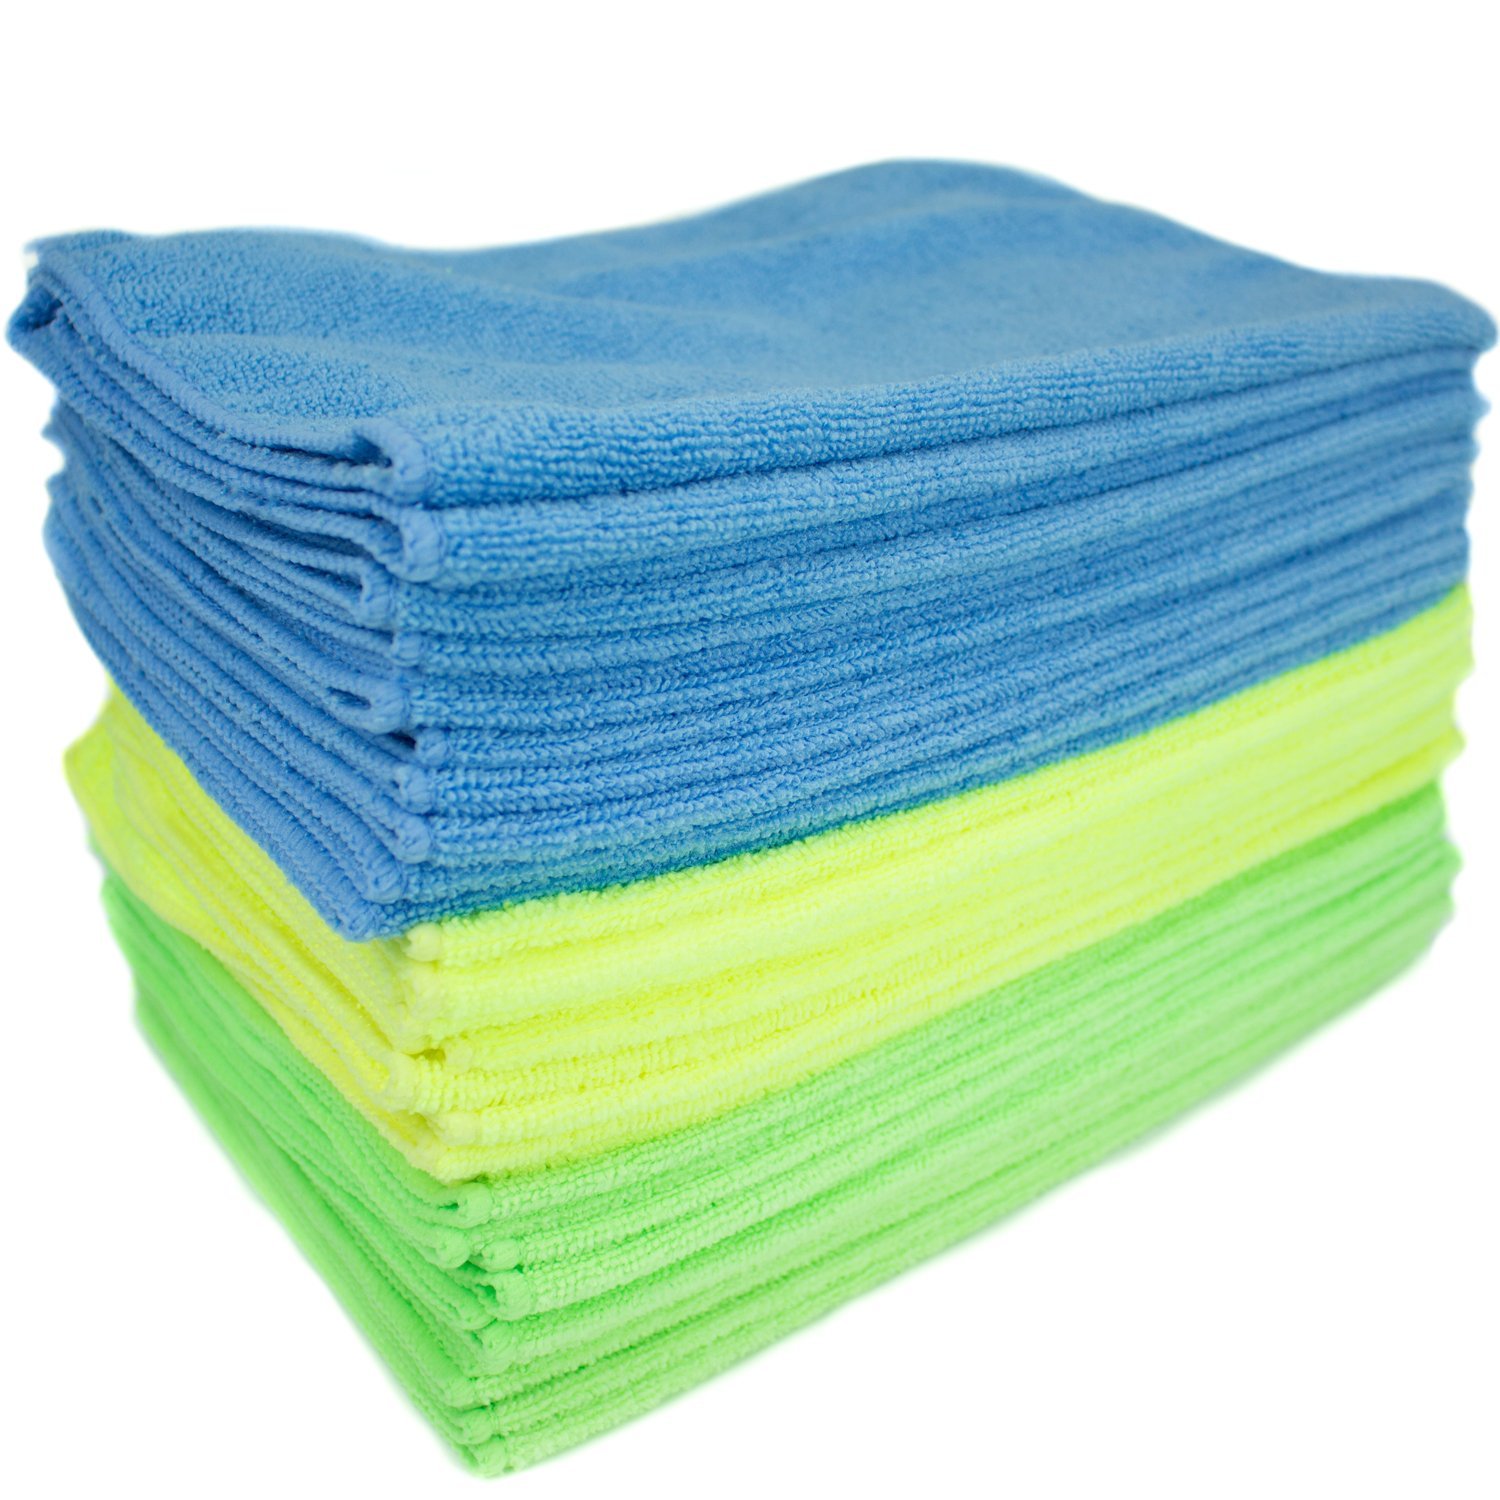 Zwipes Microfiber Cleaning Cloths 24-Pack – Just $7.61!